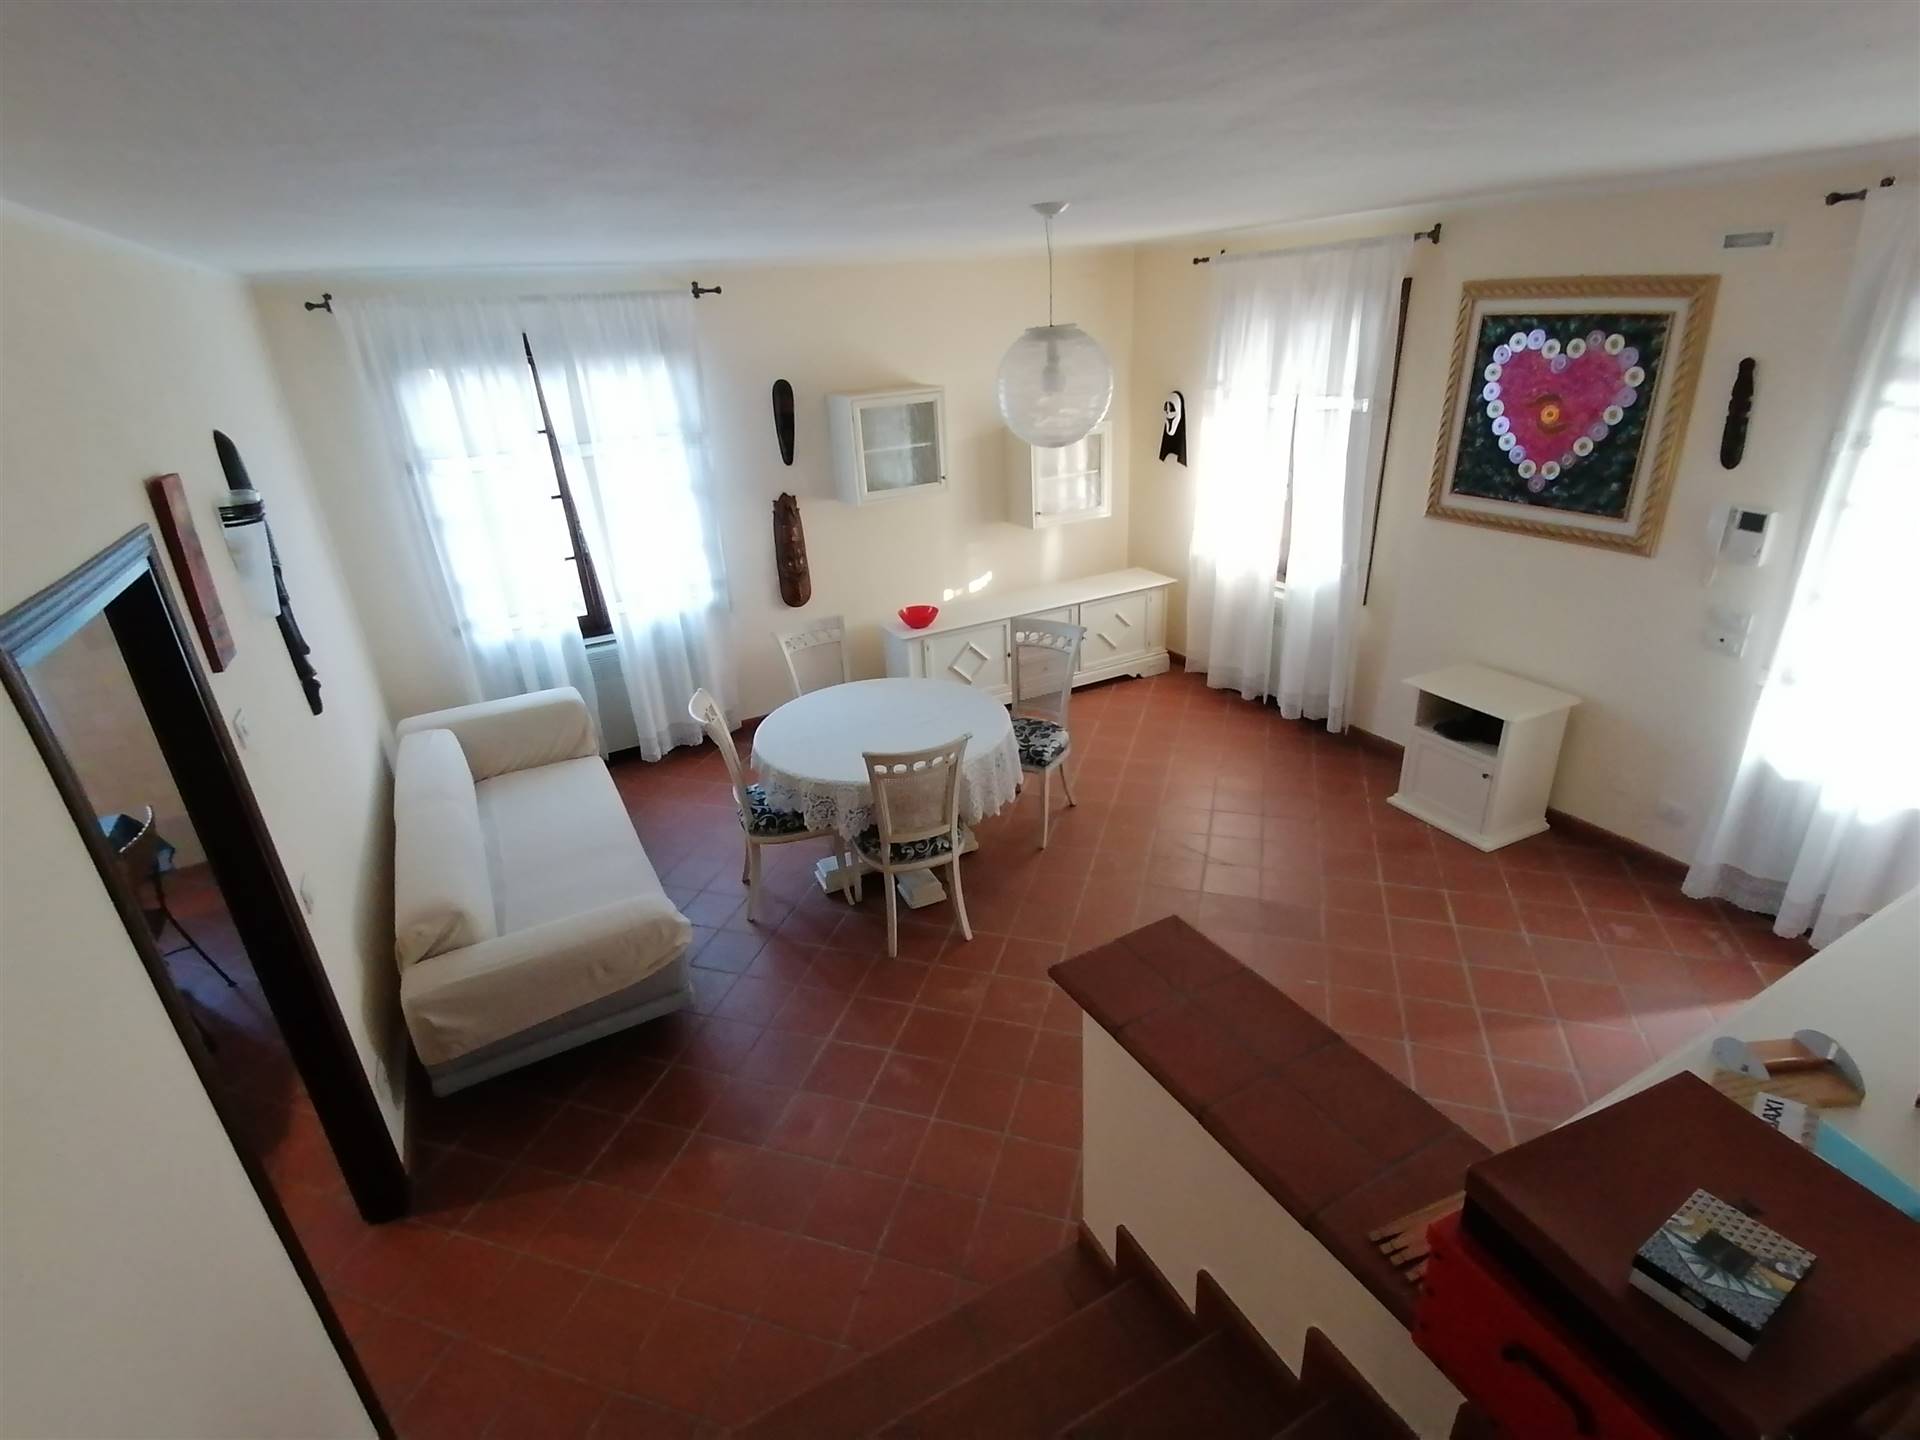 PESEGGIA, SCORZE', Duplex villa for sale of 200 Sq. mt., Habitable, Heating Individual heating system, placed at Ground on 1, composed by: 5 Rooms, 